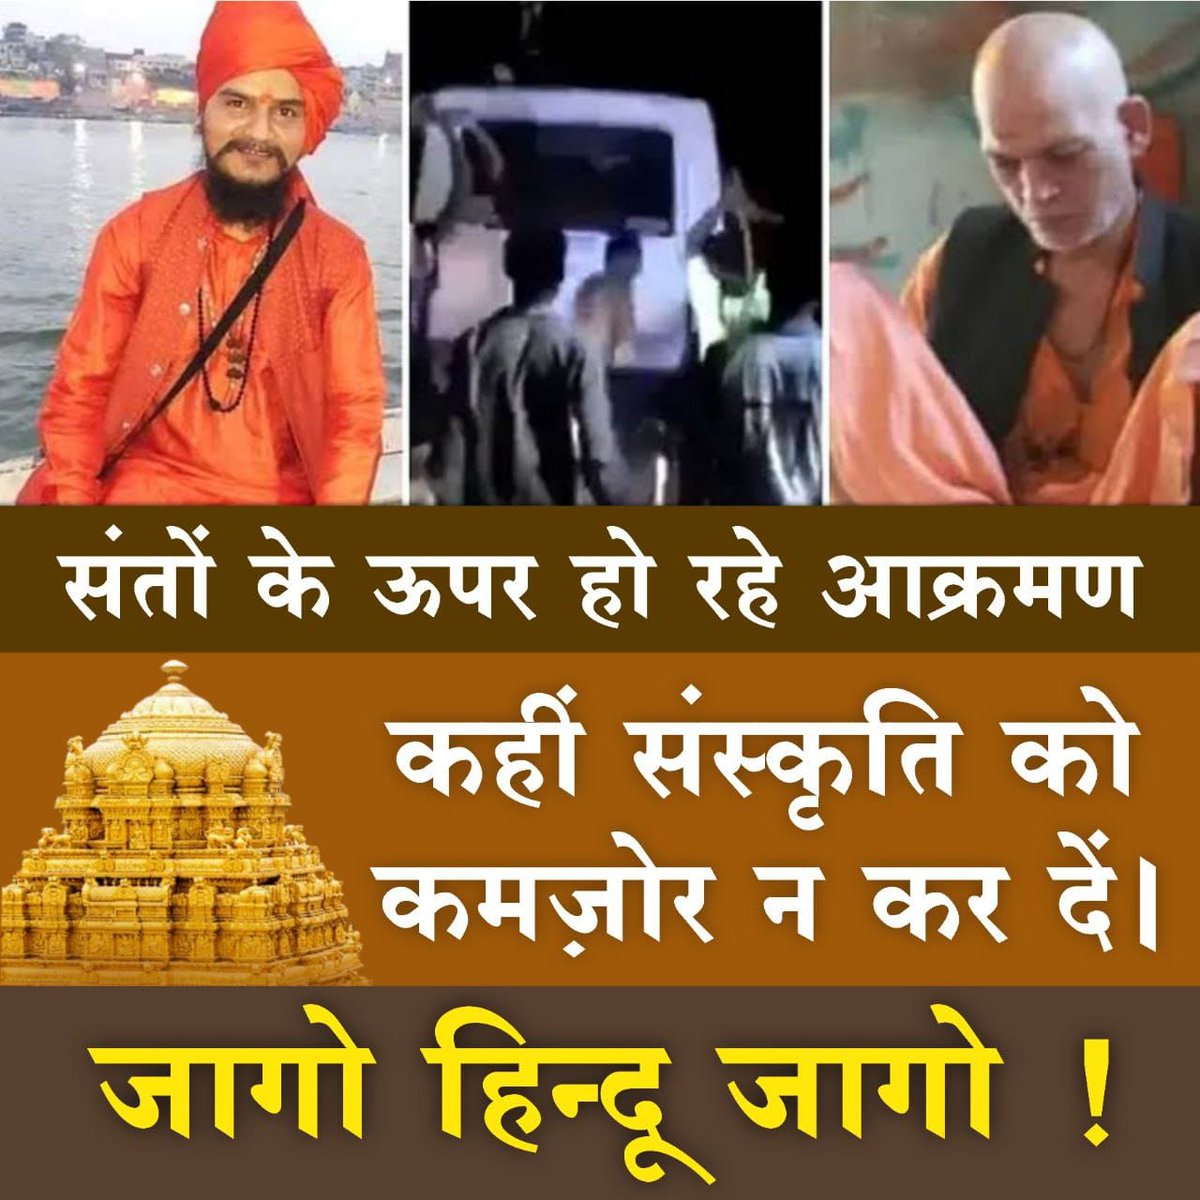 Well known by all that #संत_हैं_तो_संस्कृति_है and 
 Sant Shri Asharamji Bapu is a spreader of Sanatan Dharma. 
So Jaago Hindu saints are not in jail, your culture is in jail.